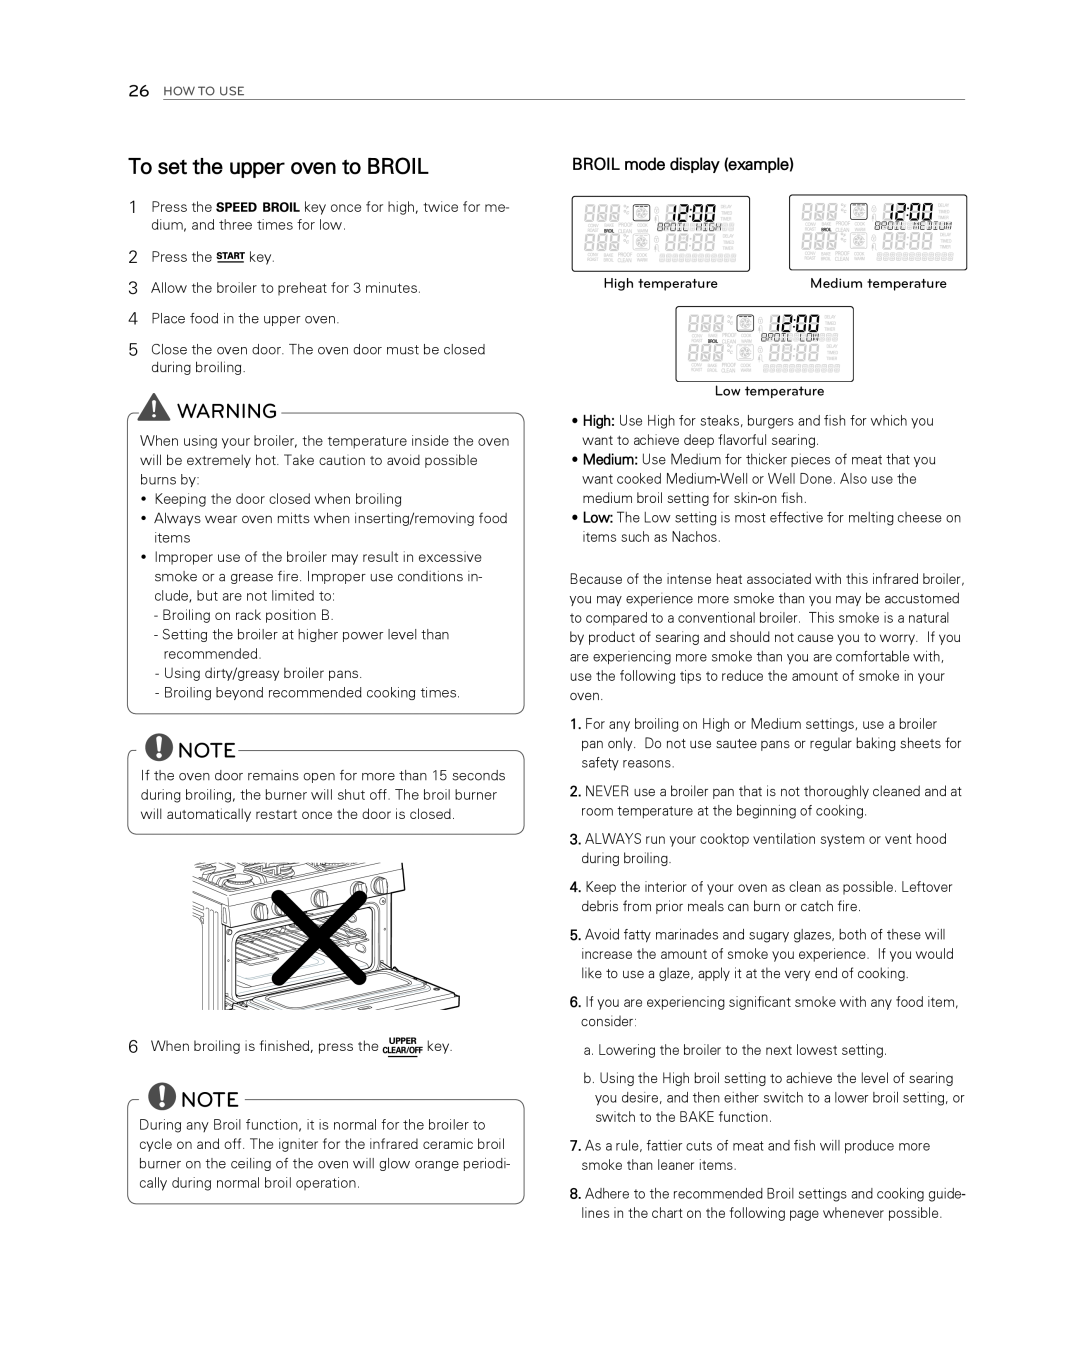 LG Electronics LDG3017ST owner manual To set the upper oven to BROIL, BROIL mode display example 